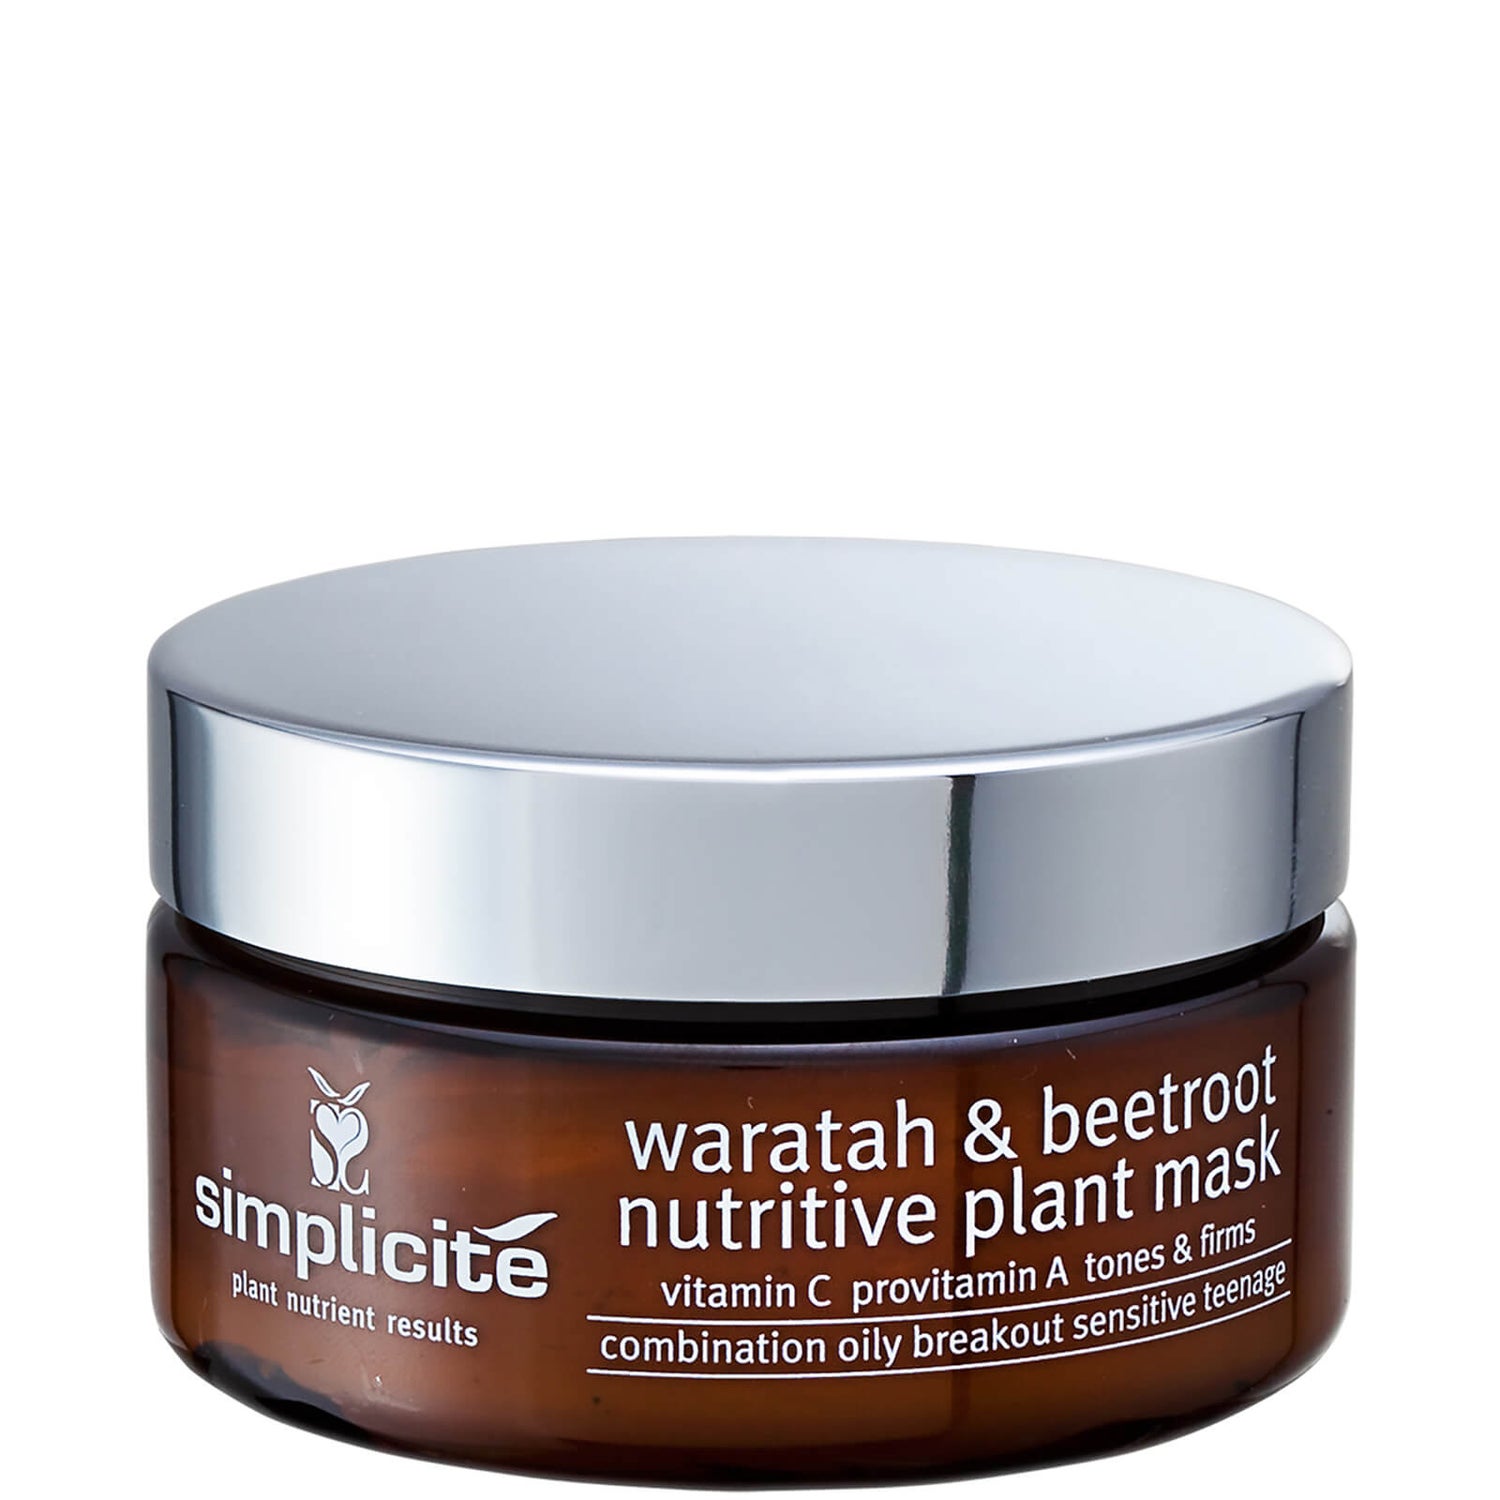 Simplicite Waratah And Beetroot Nutritive Plant Mask 110g